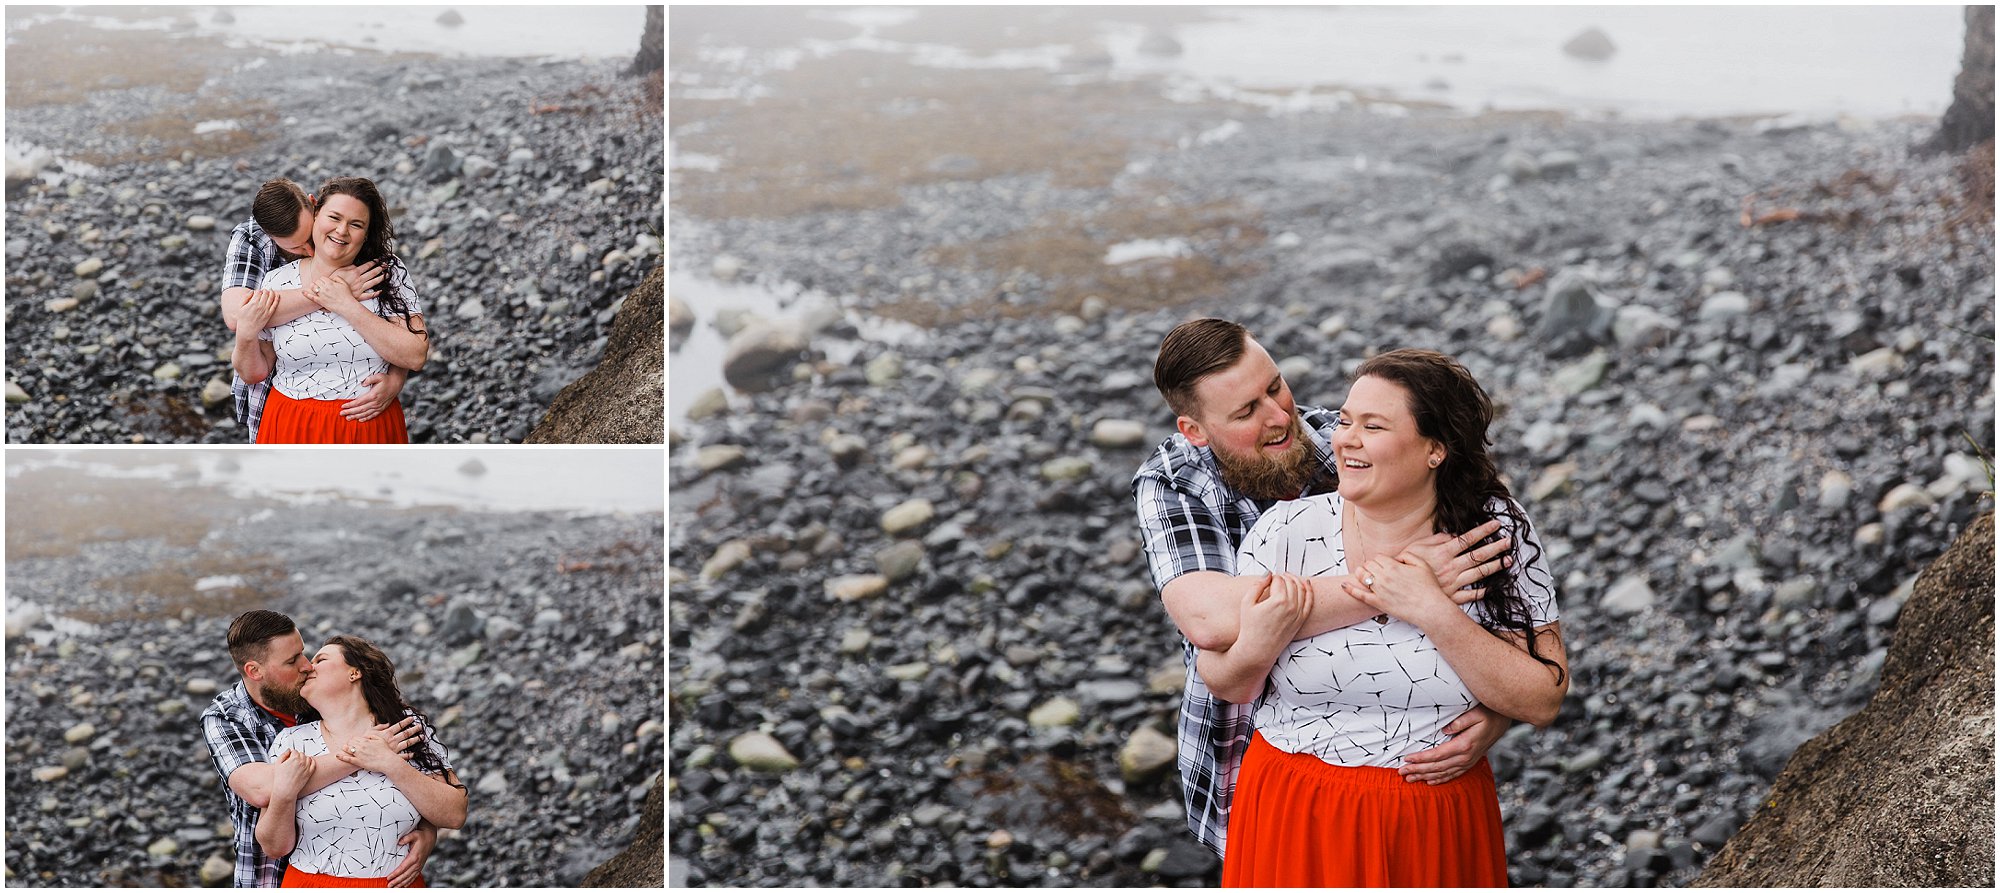 The beautiful rocky Washington coast is the perfect place for your engagement photo session. | Erica Swantek Photography